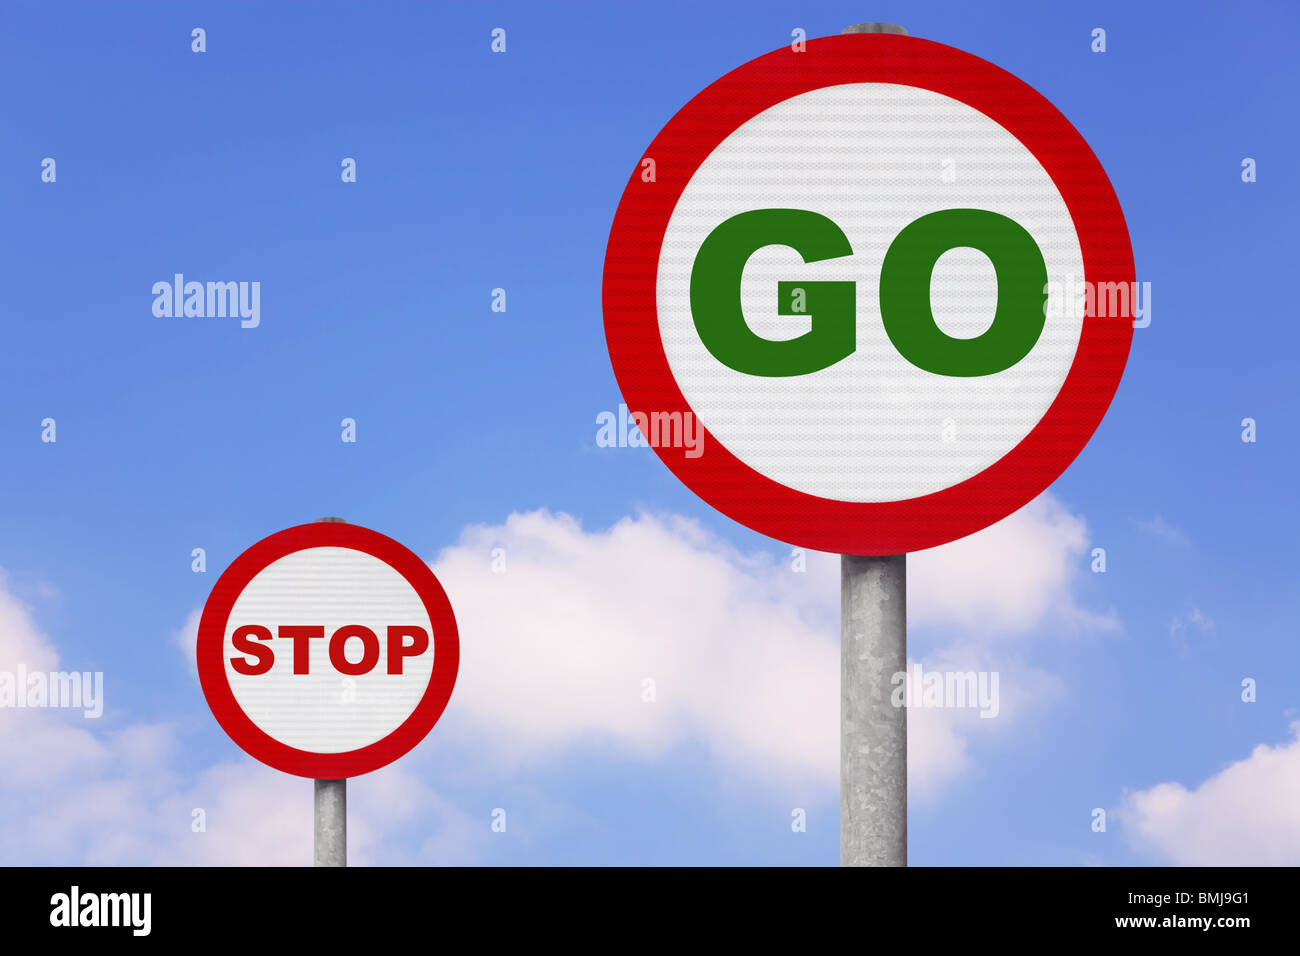 Round roadsigns with GO and STOP on them against a blue cloudy sky. Stock Photo